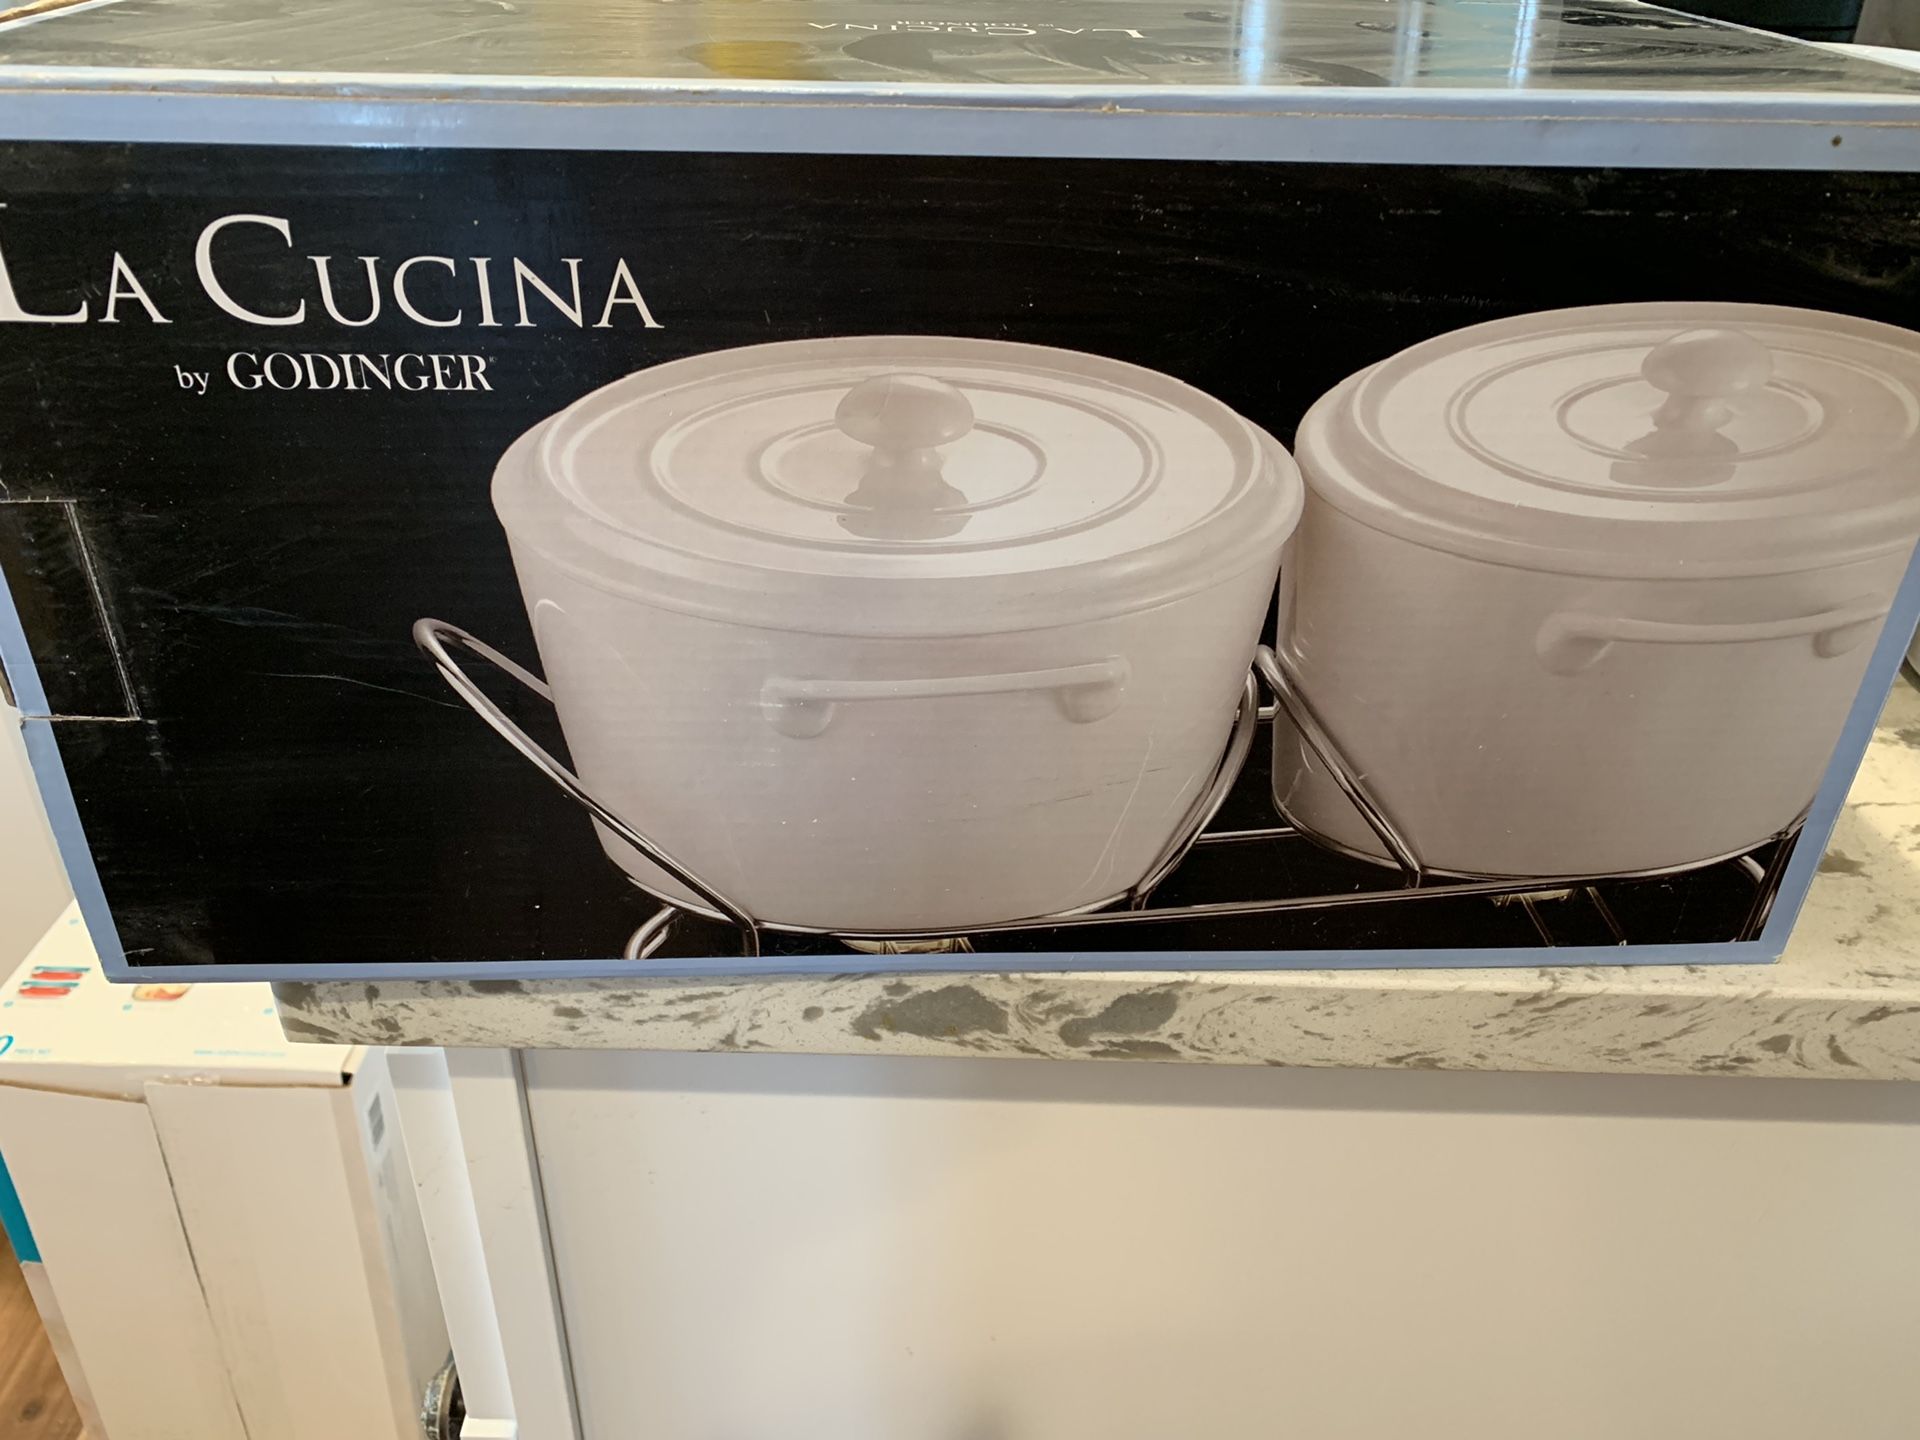 New in box, La Cocina double covered bakers.